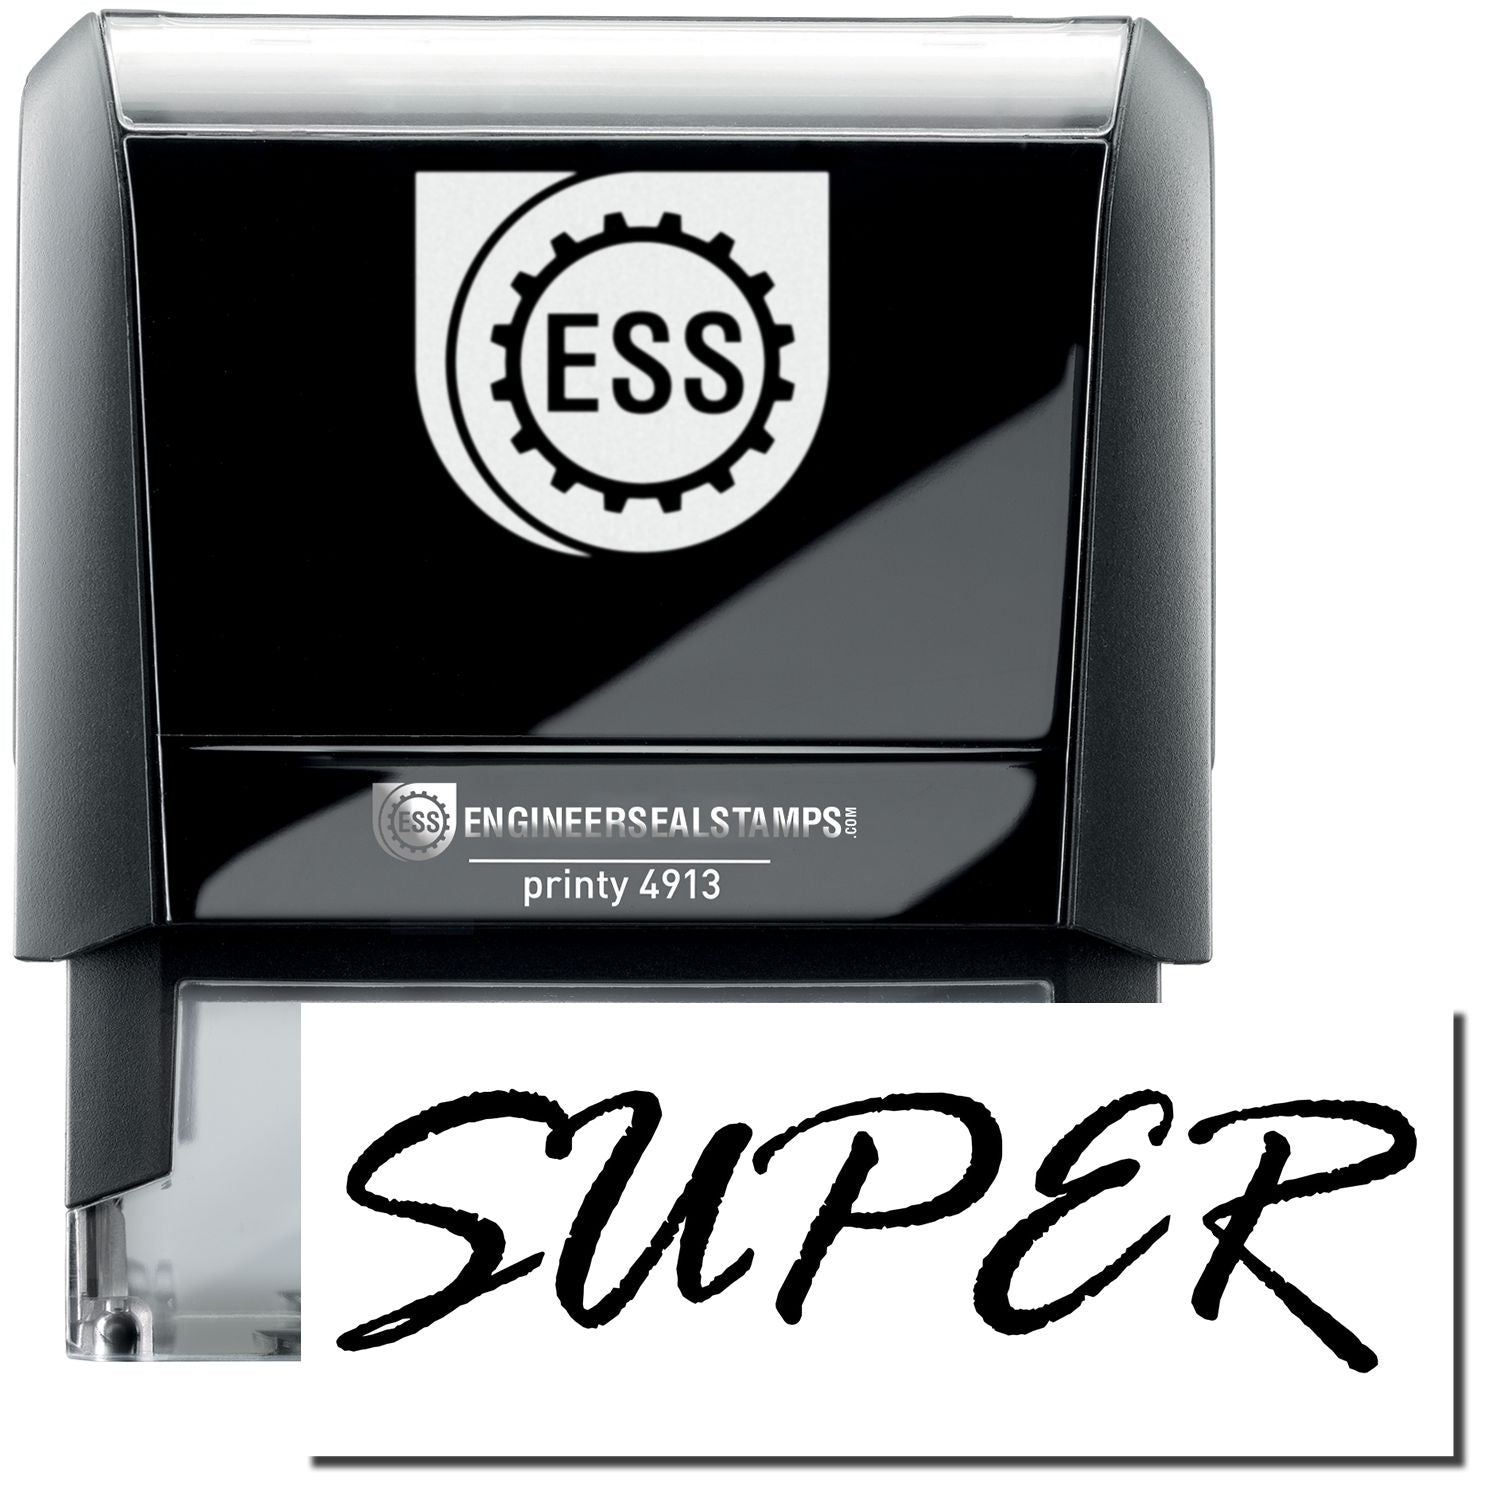 A self-inking stamp with a stamped image showing how the text "SUPER" in a large cursive font is displayed by it.